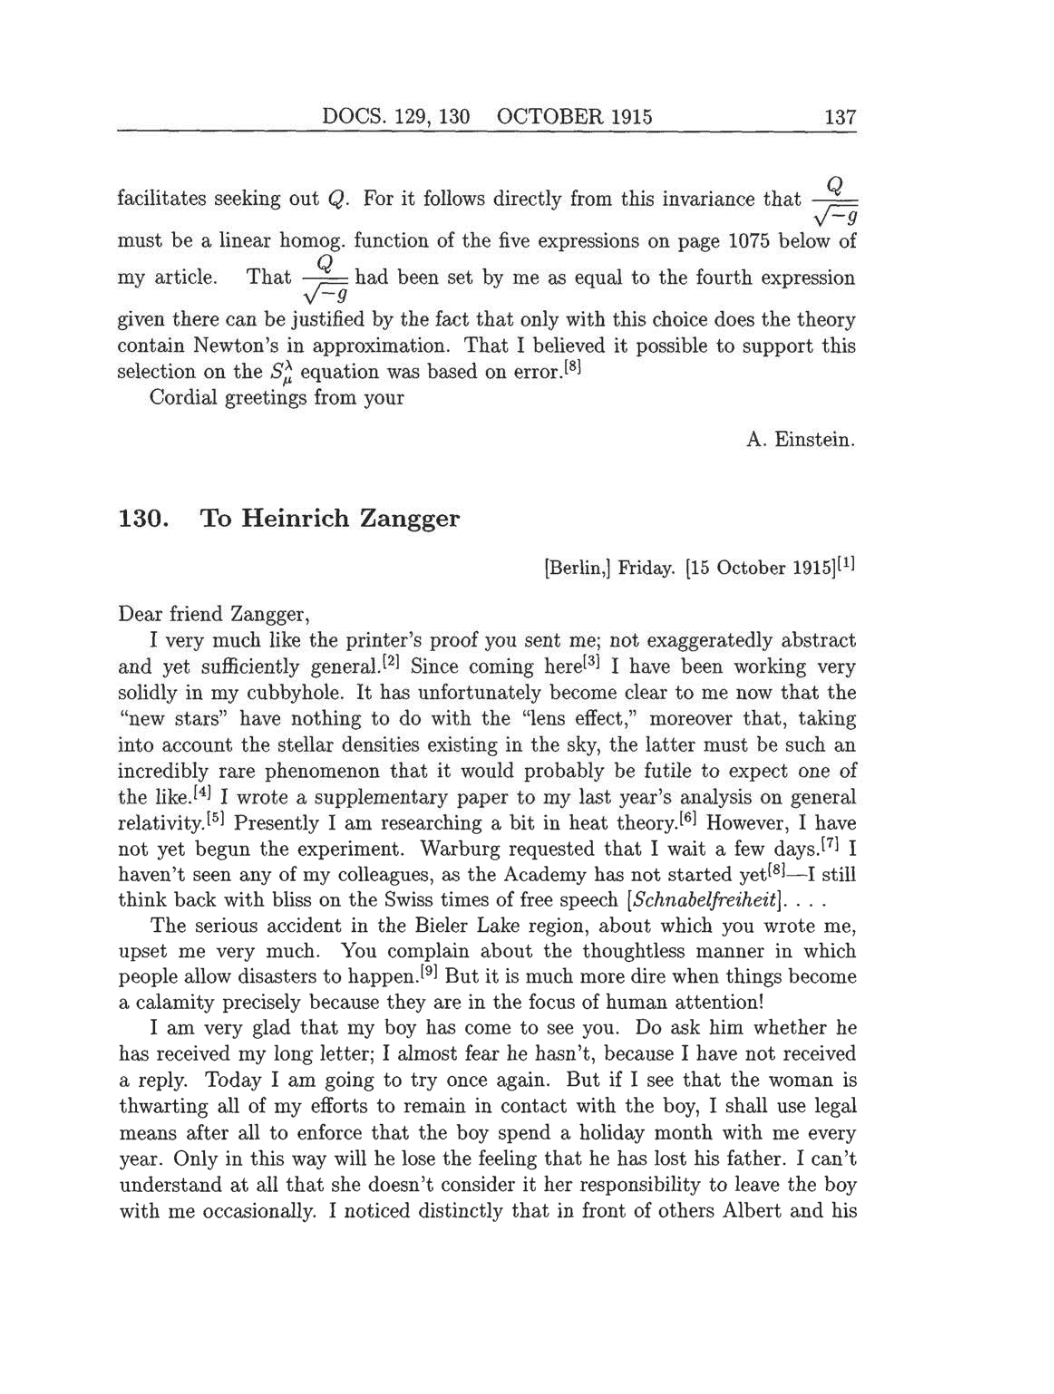 Volume 8: The Berlin Years: Correspondence, 1914-1918 (English translation supplement) page 137